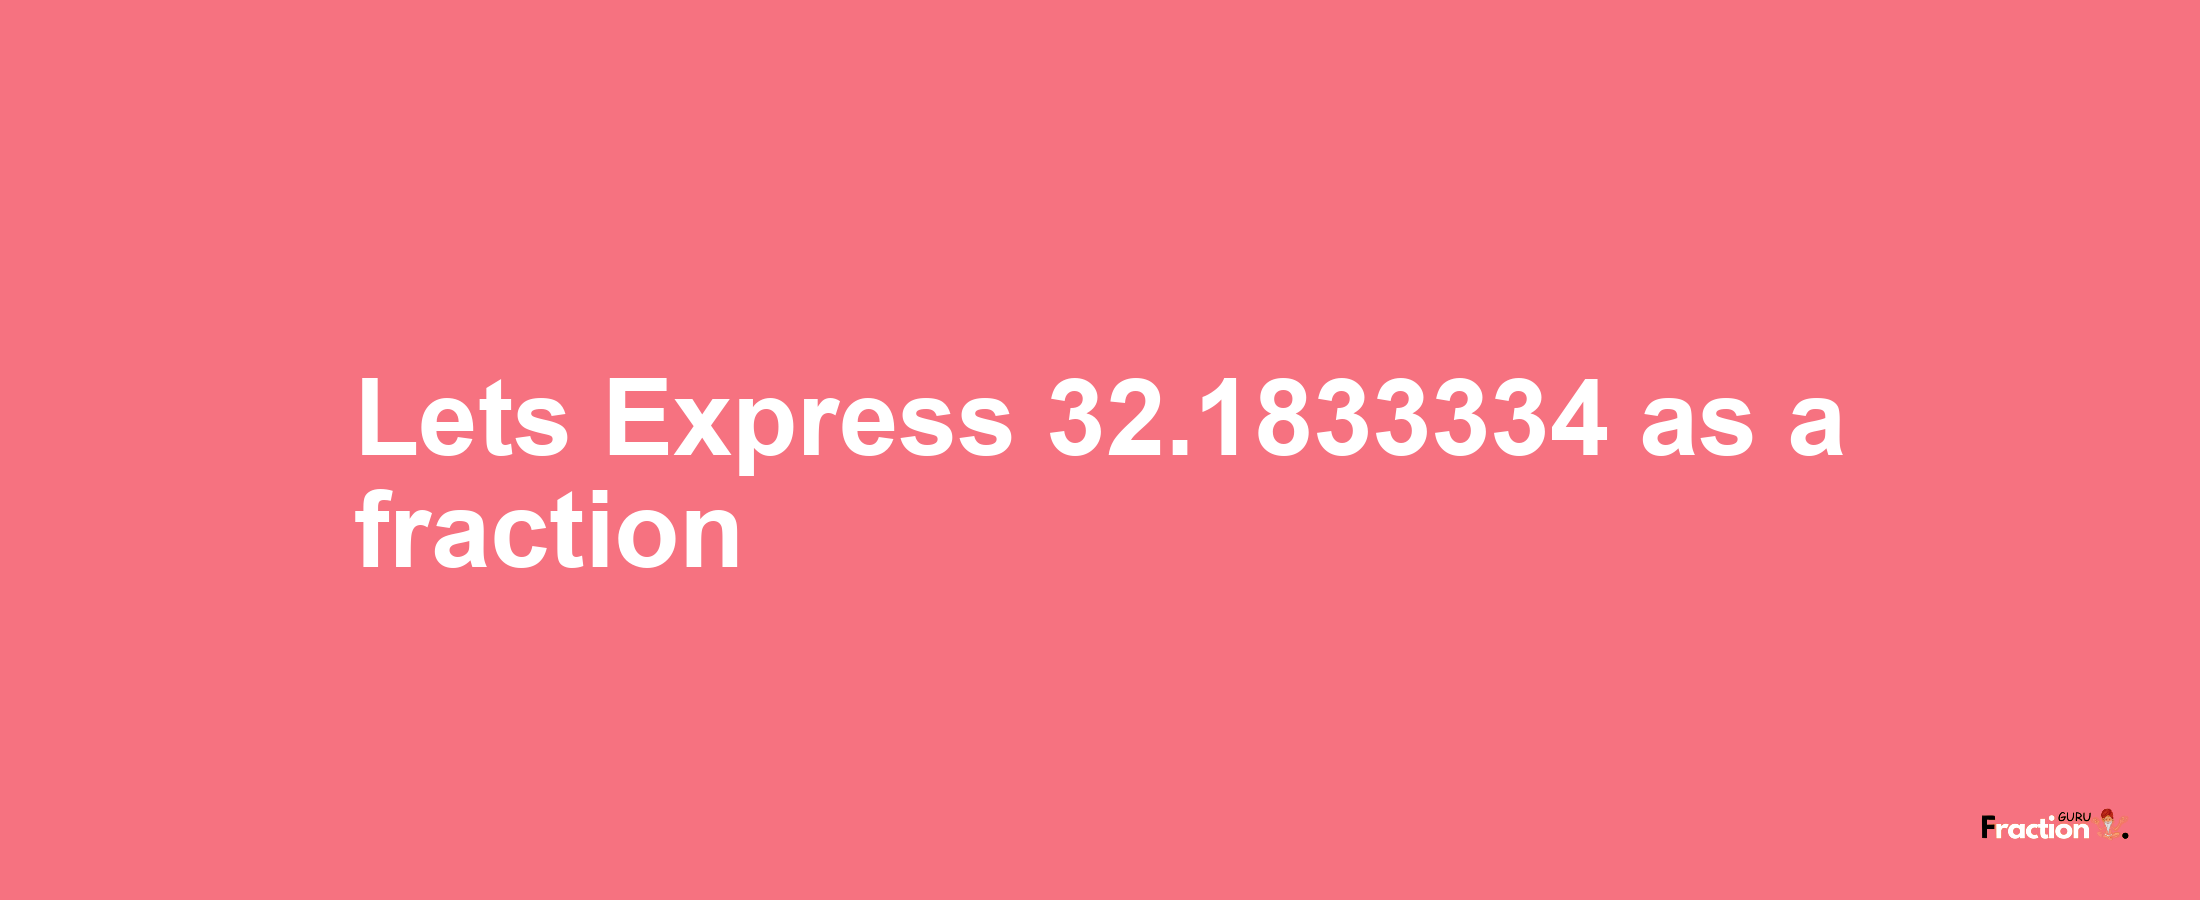 Lets Express 32.1833334 as afraction